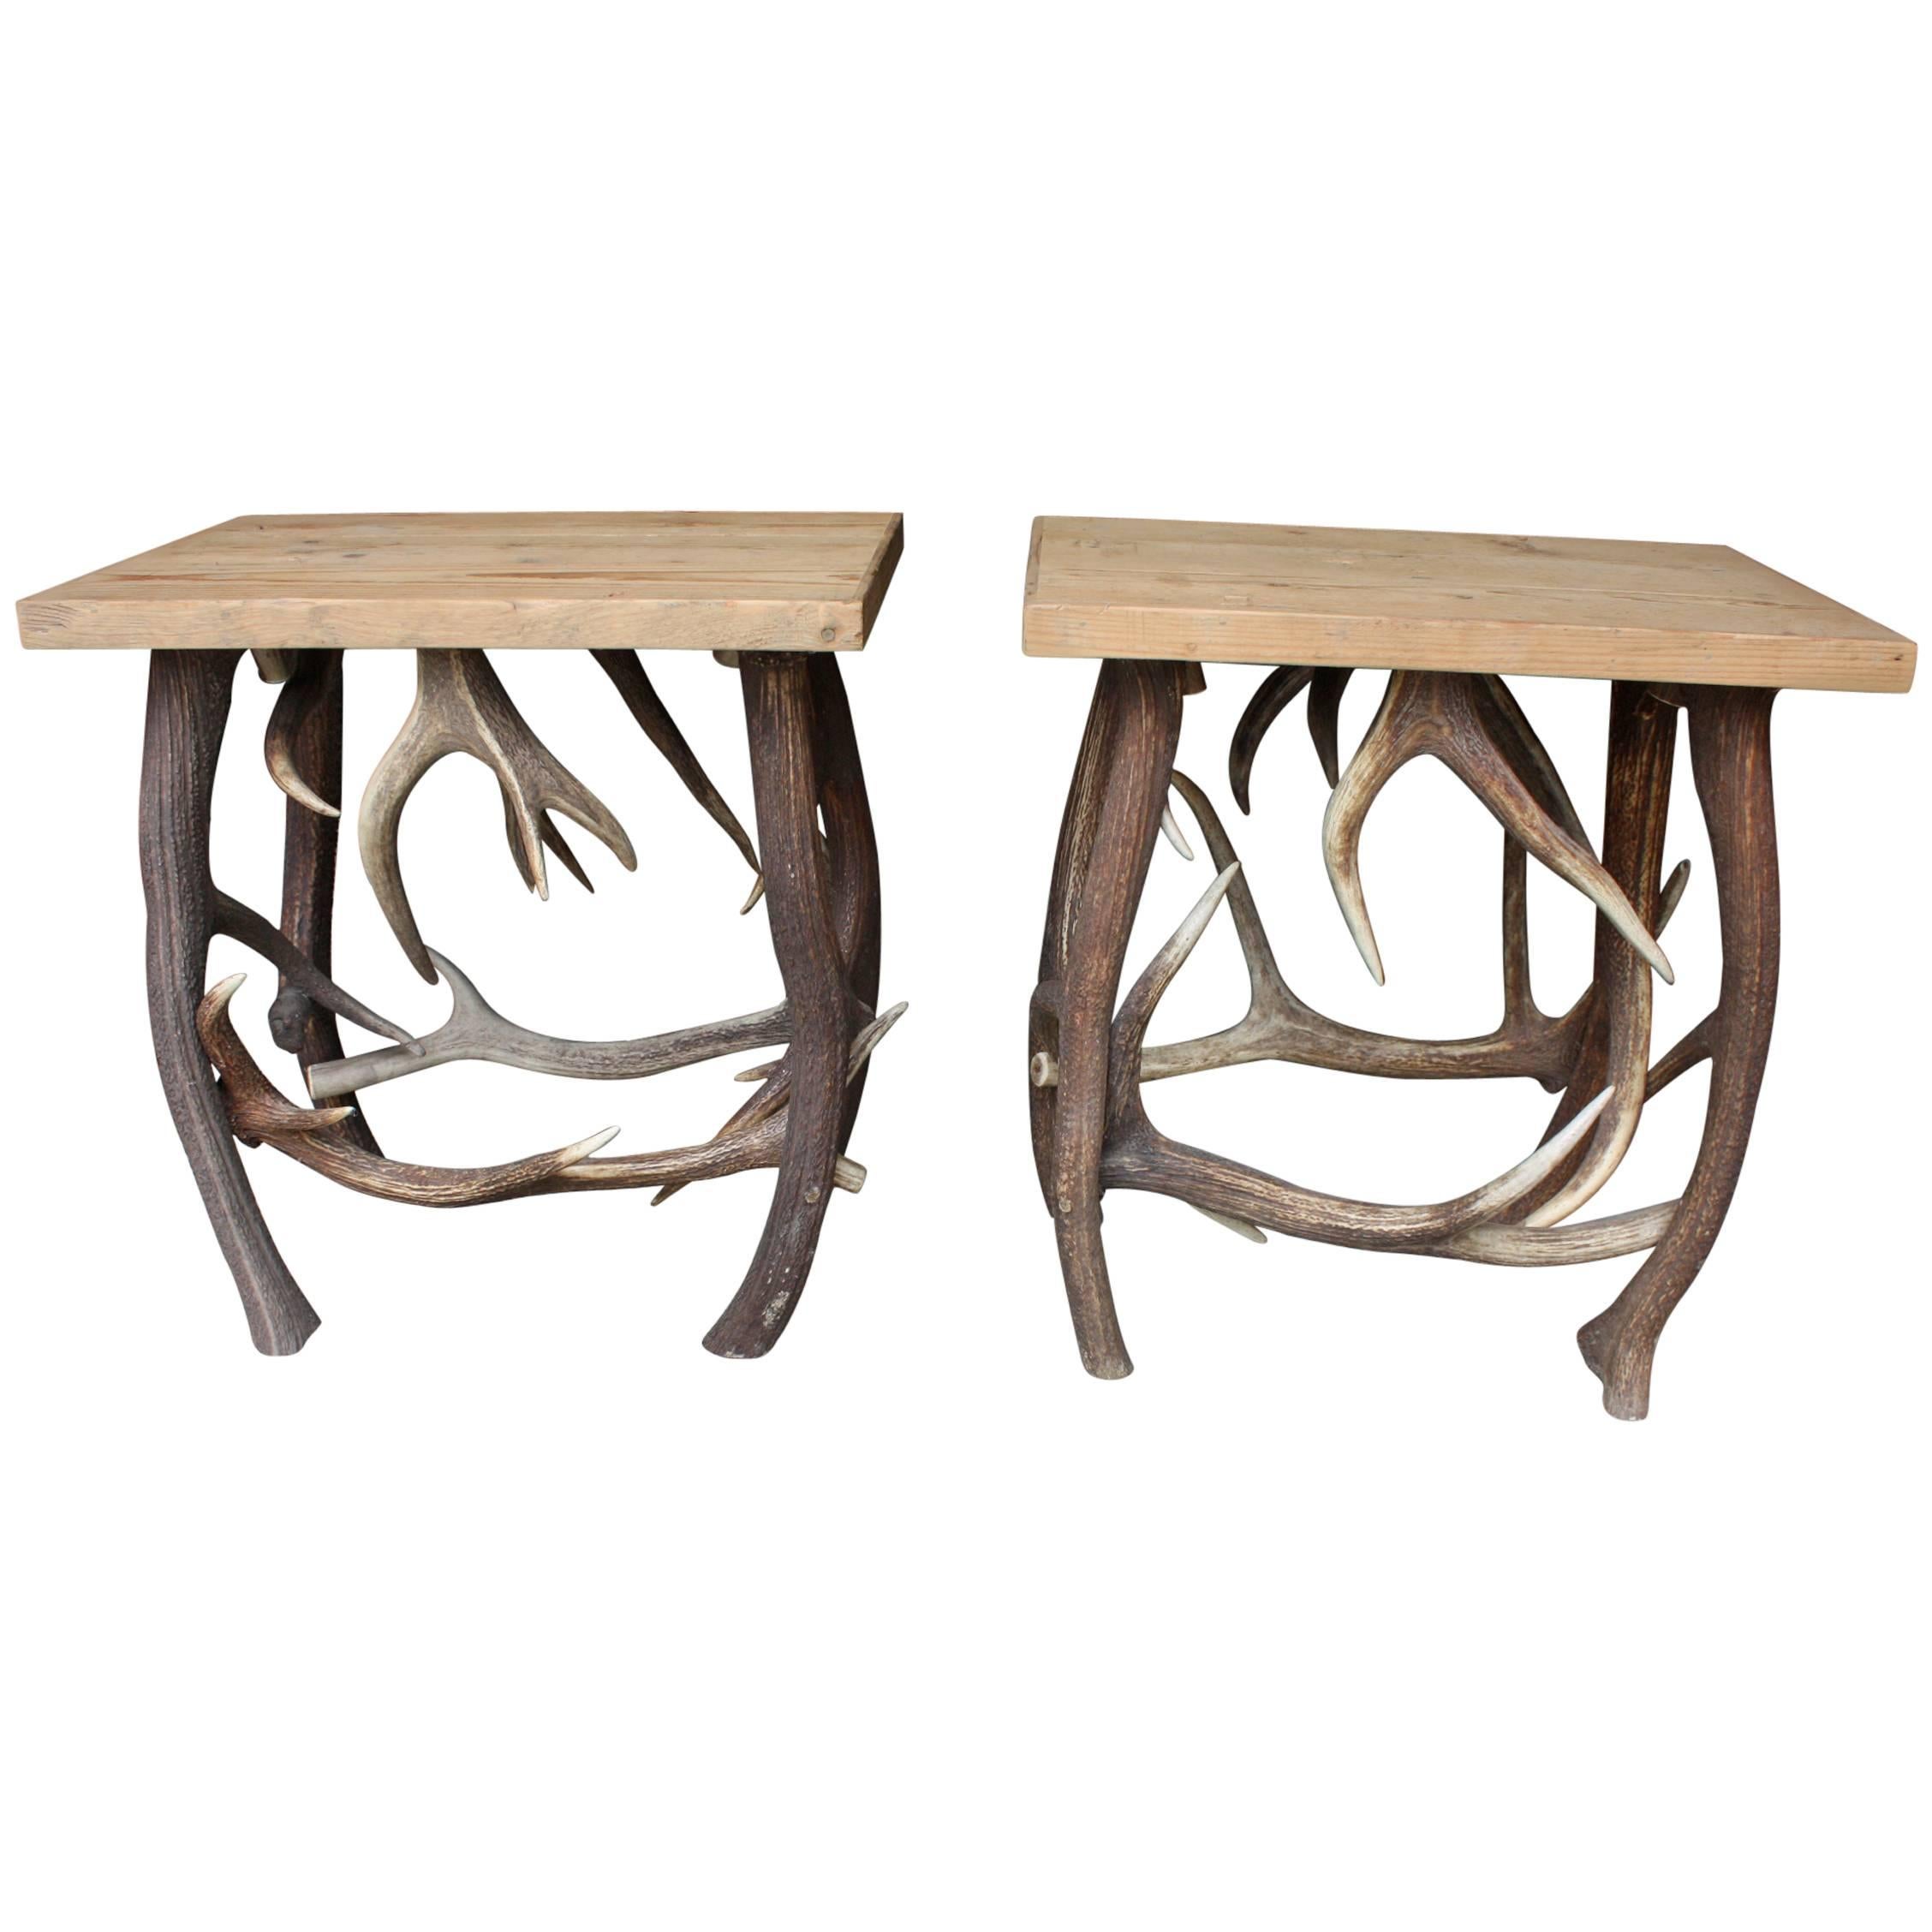 Stag Antler Tables